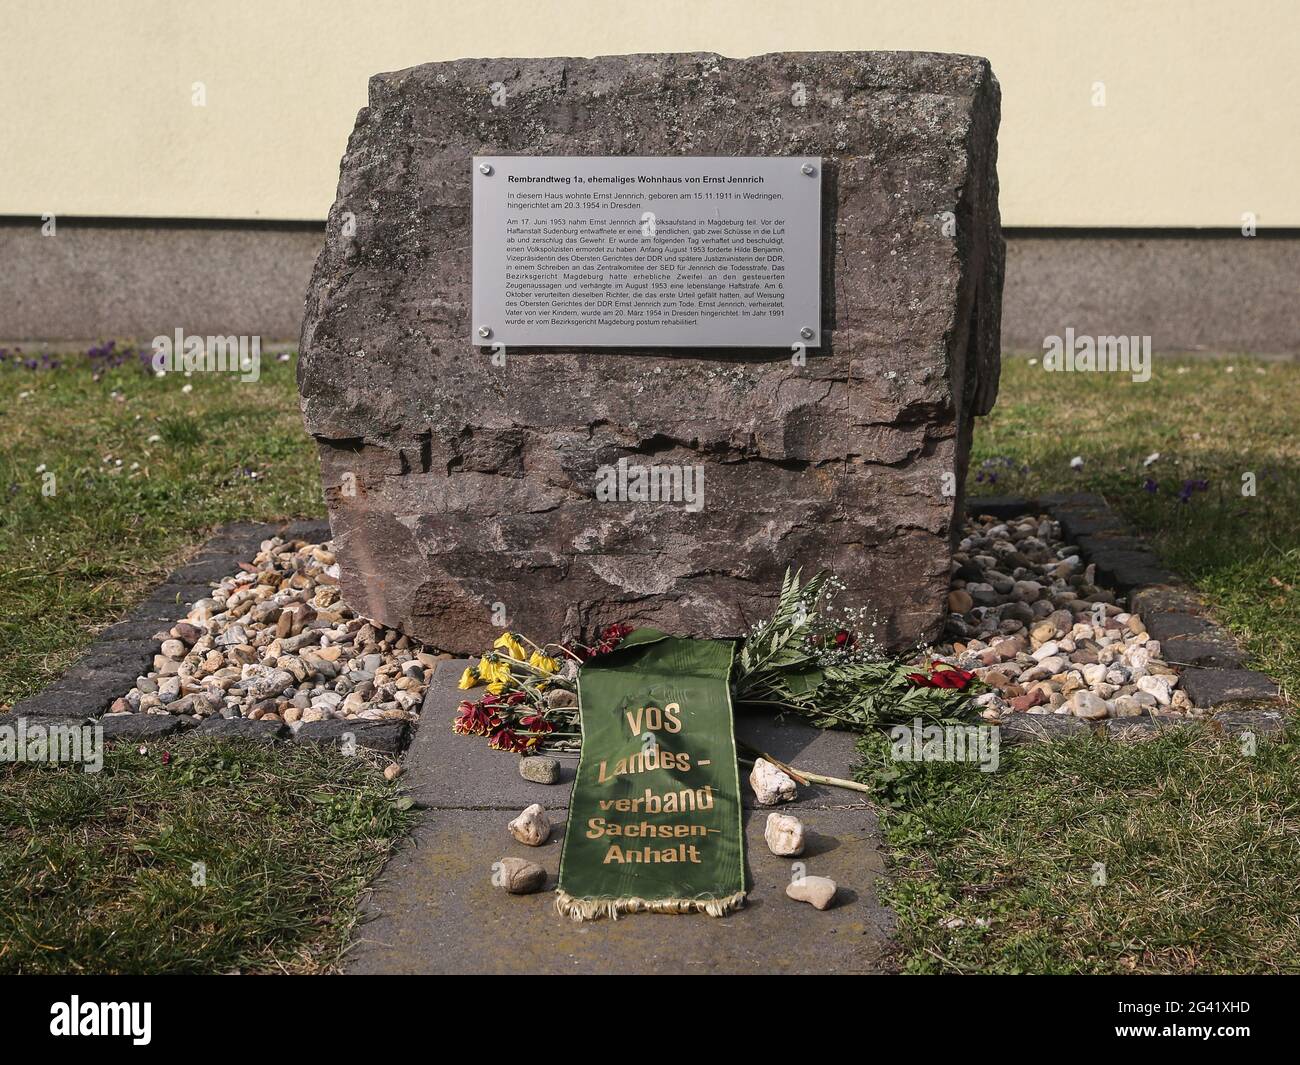 Memorial stone for the victims of the dictatorship in the GDR Ernst Jennrich in Magdeburg-Northwest Stock Photo